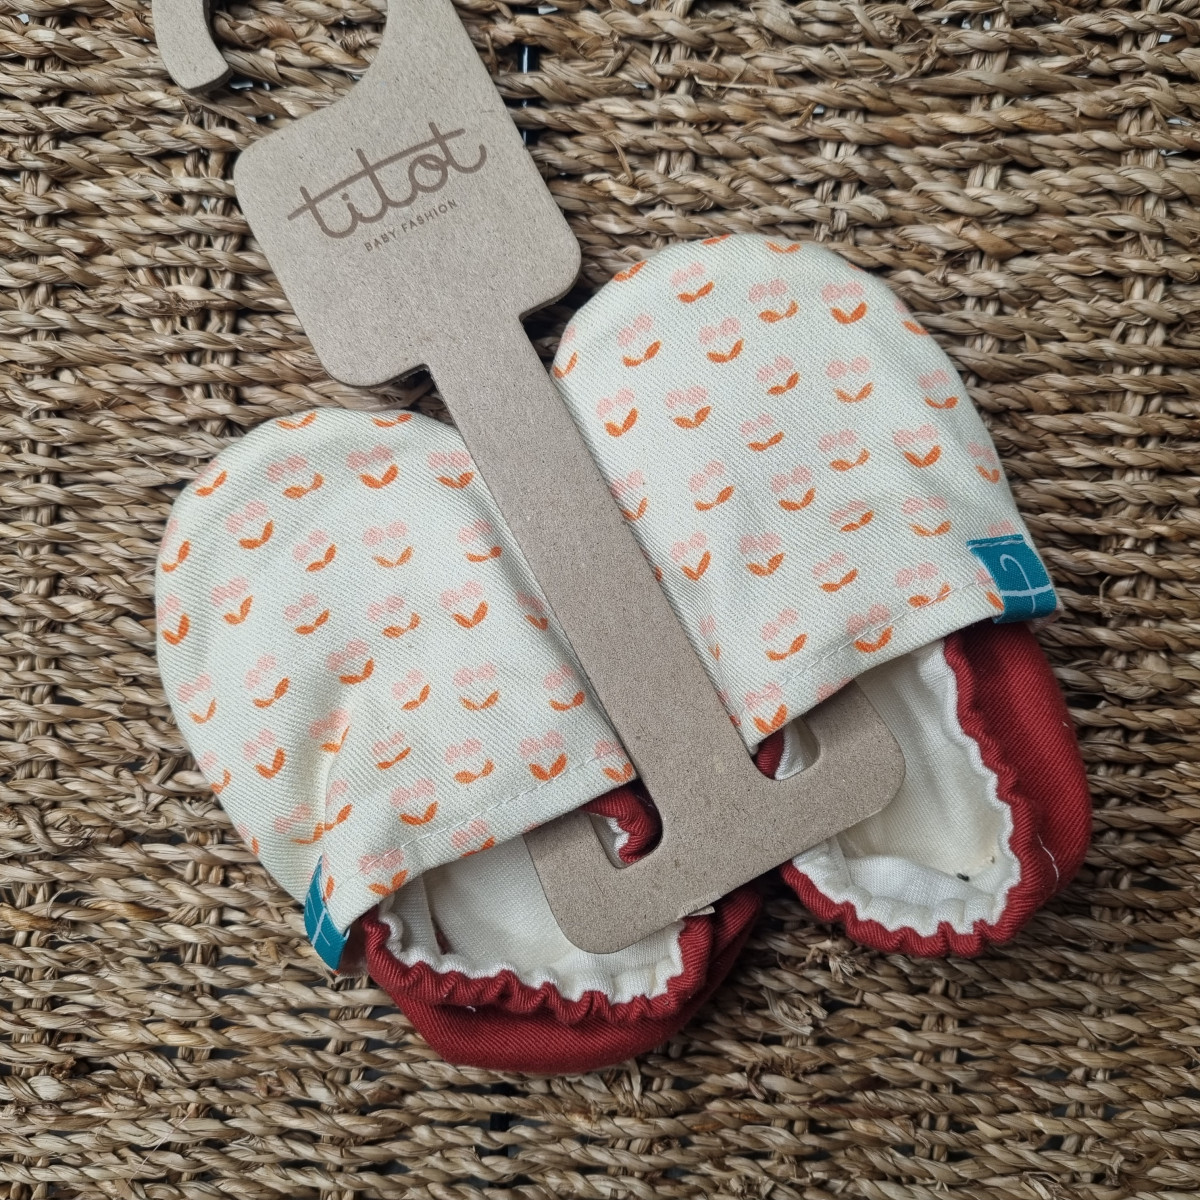 Chaussons Titot - Baby Cherries - Boutique Toup'tibou - photo 6